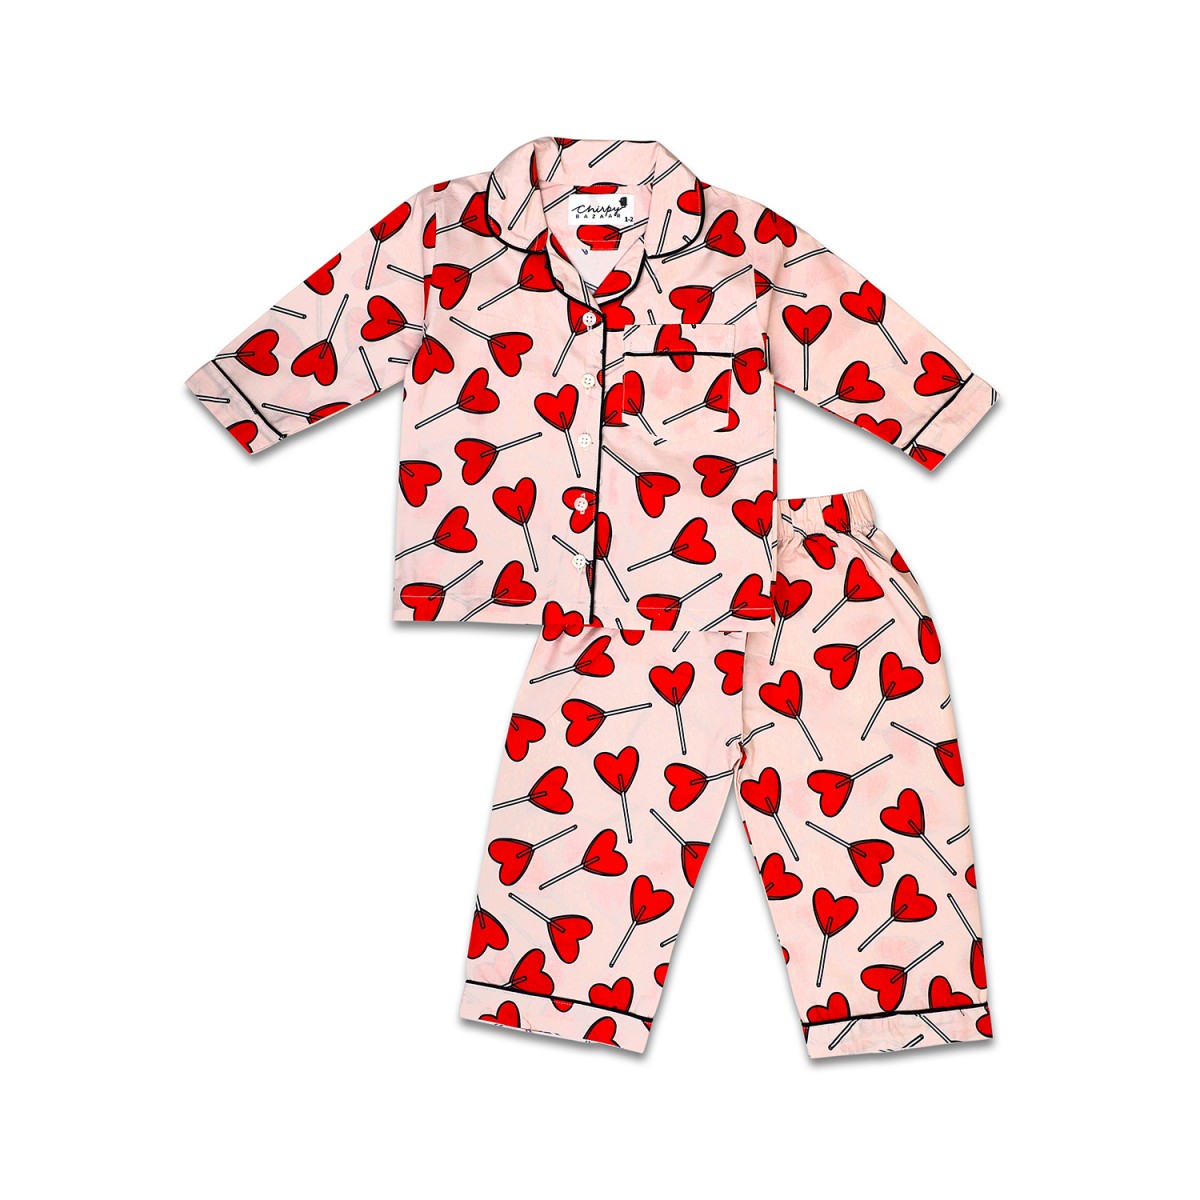 Candy hearts Nightsuit - Adults